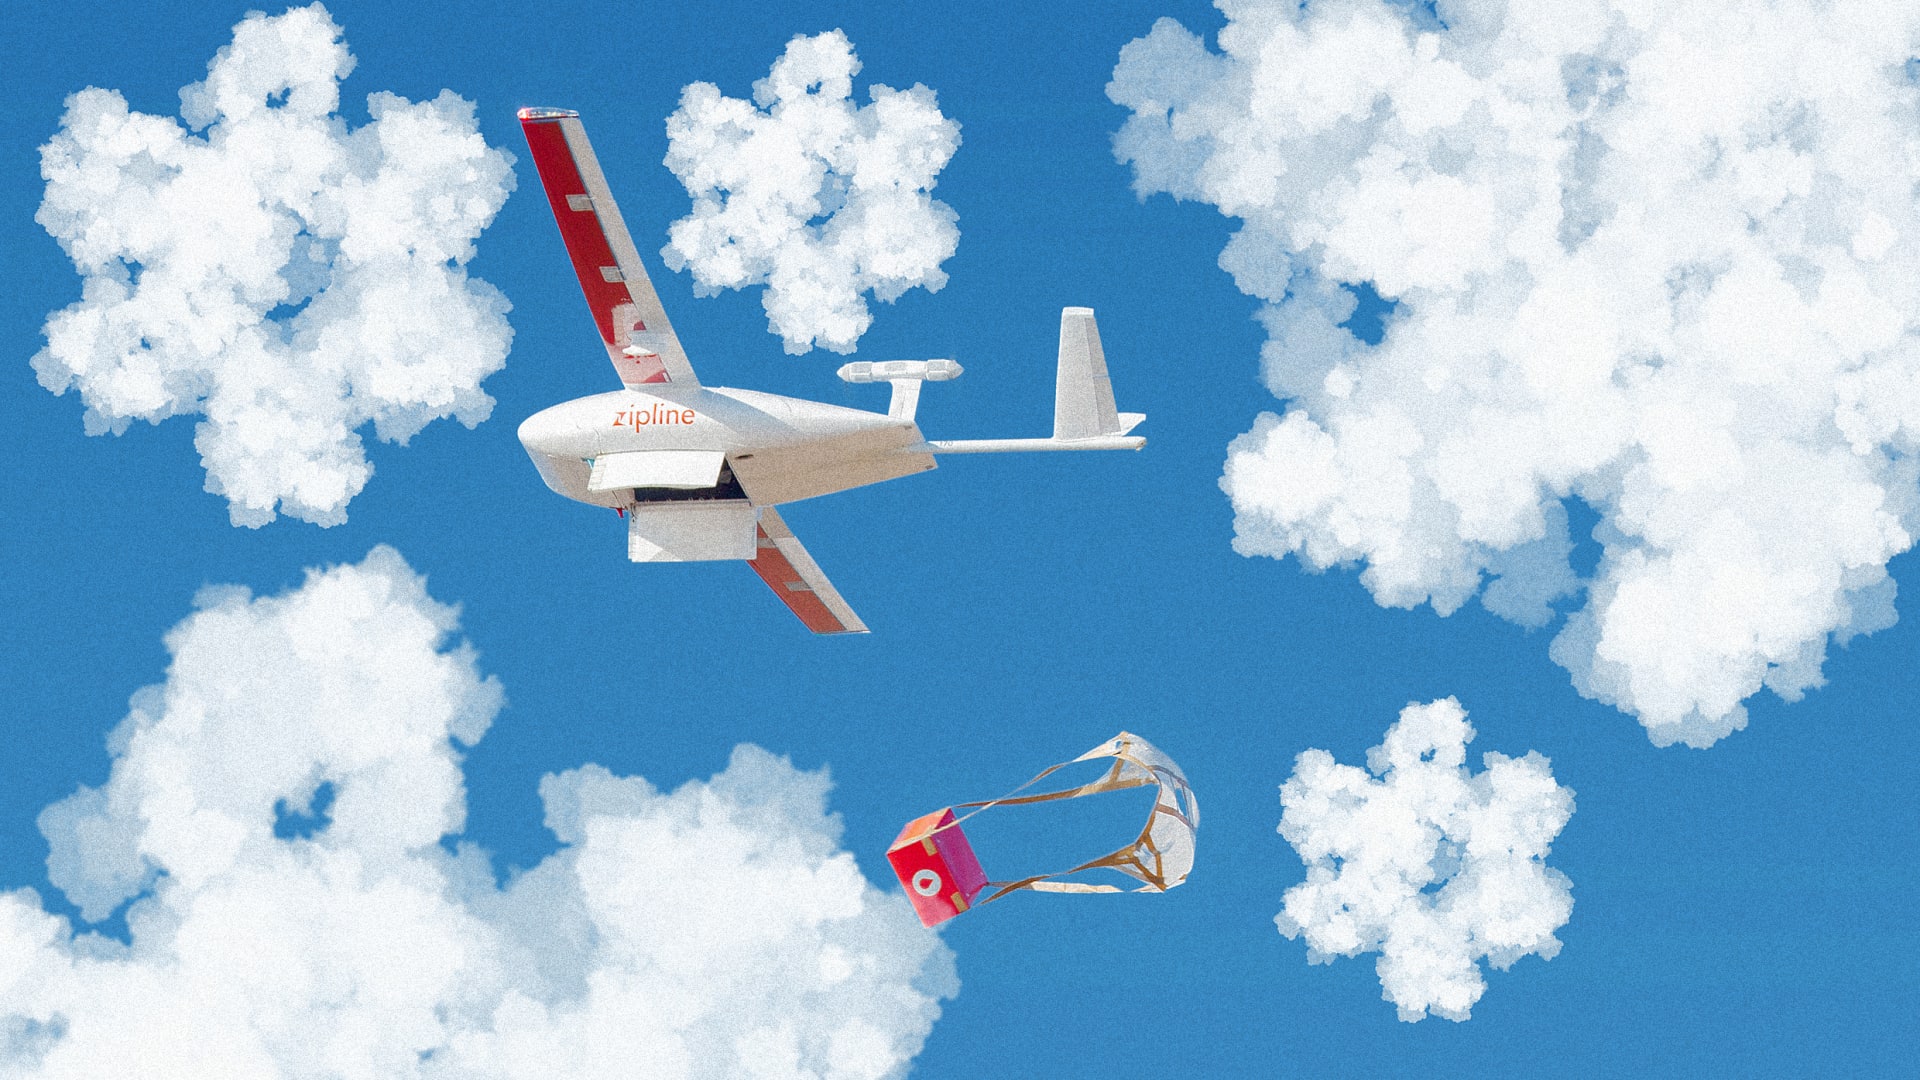 These drones will deliver the COVID-19 vaccine so it stays cold